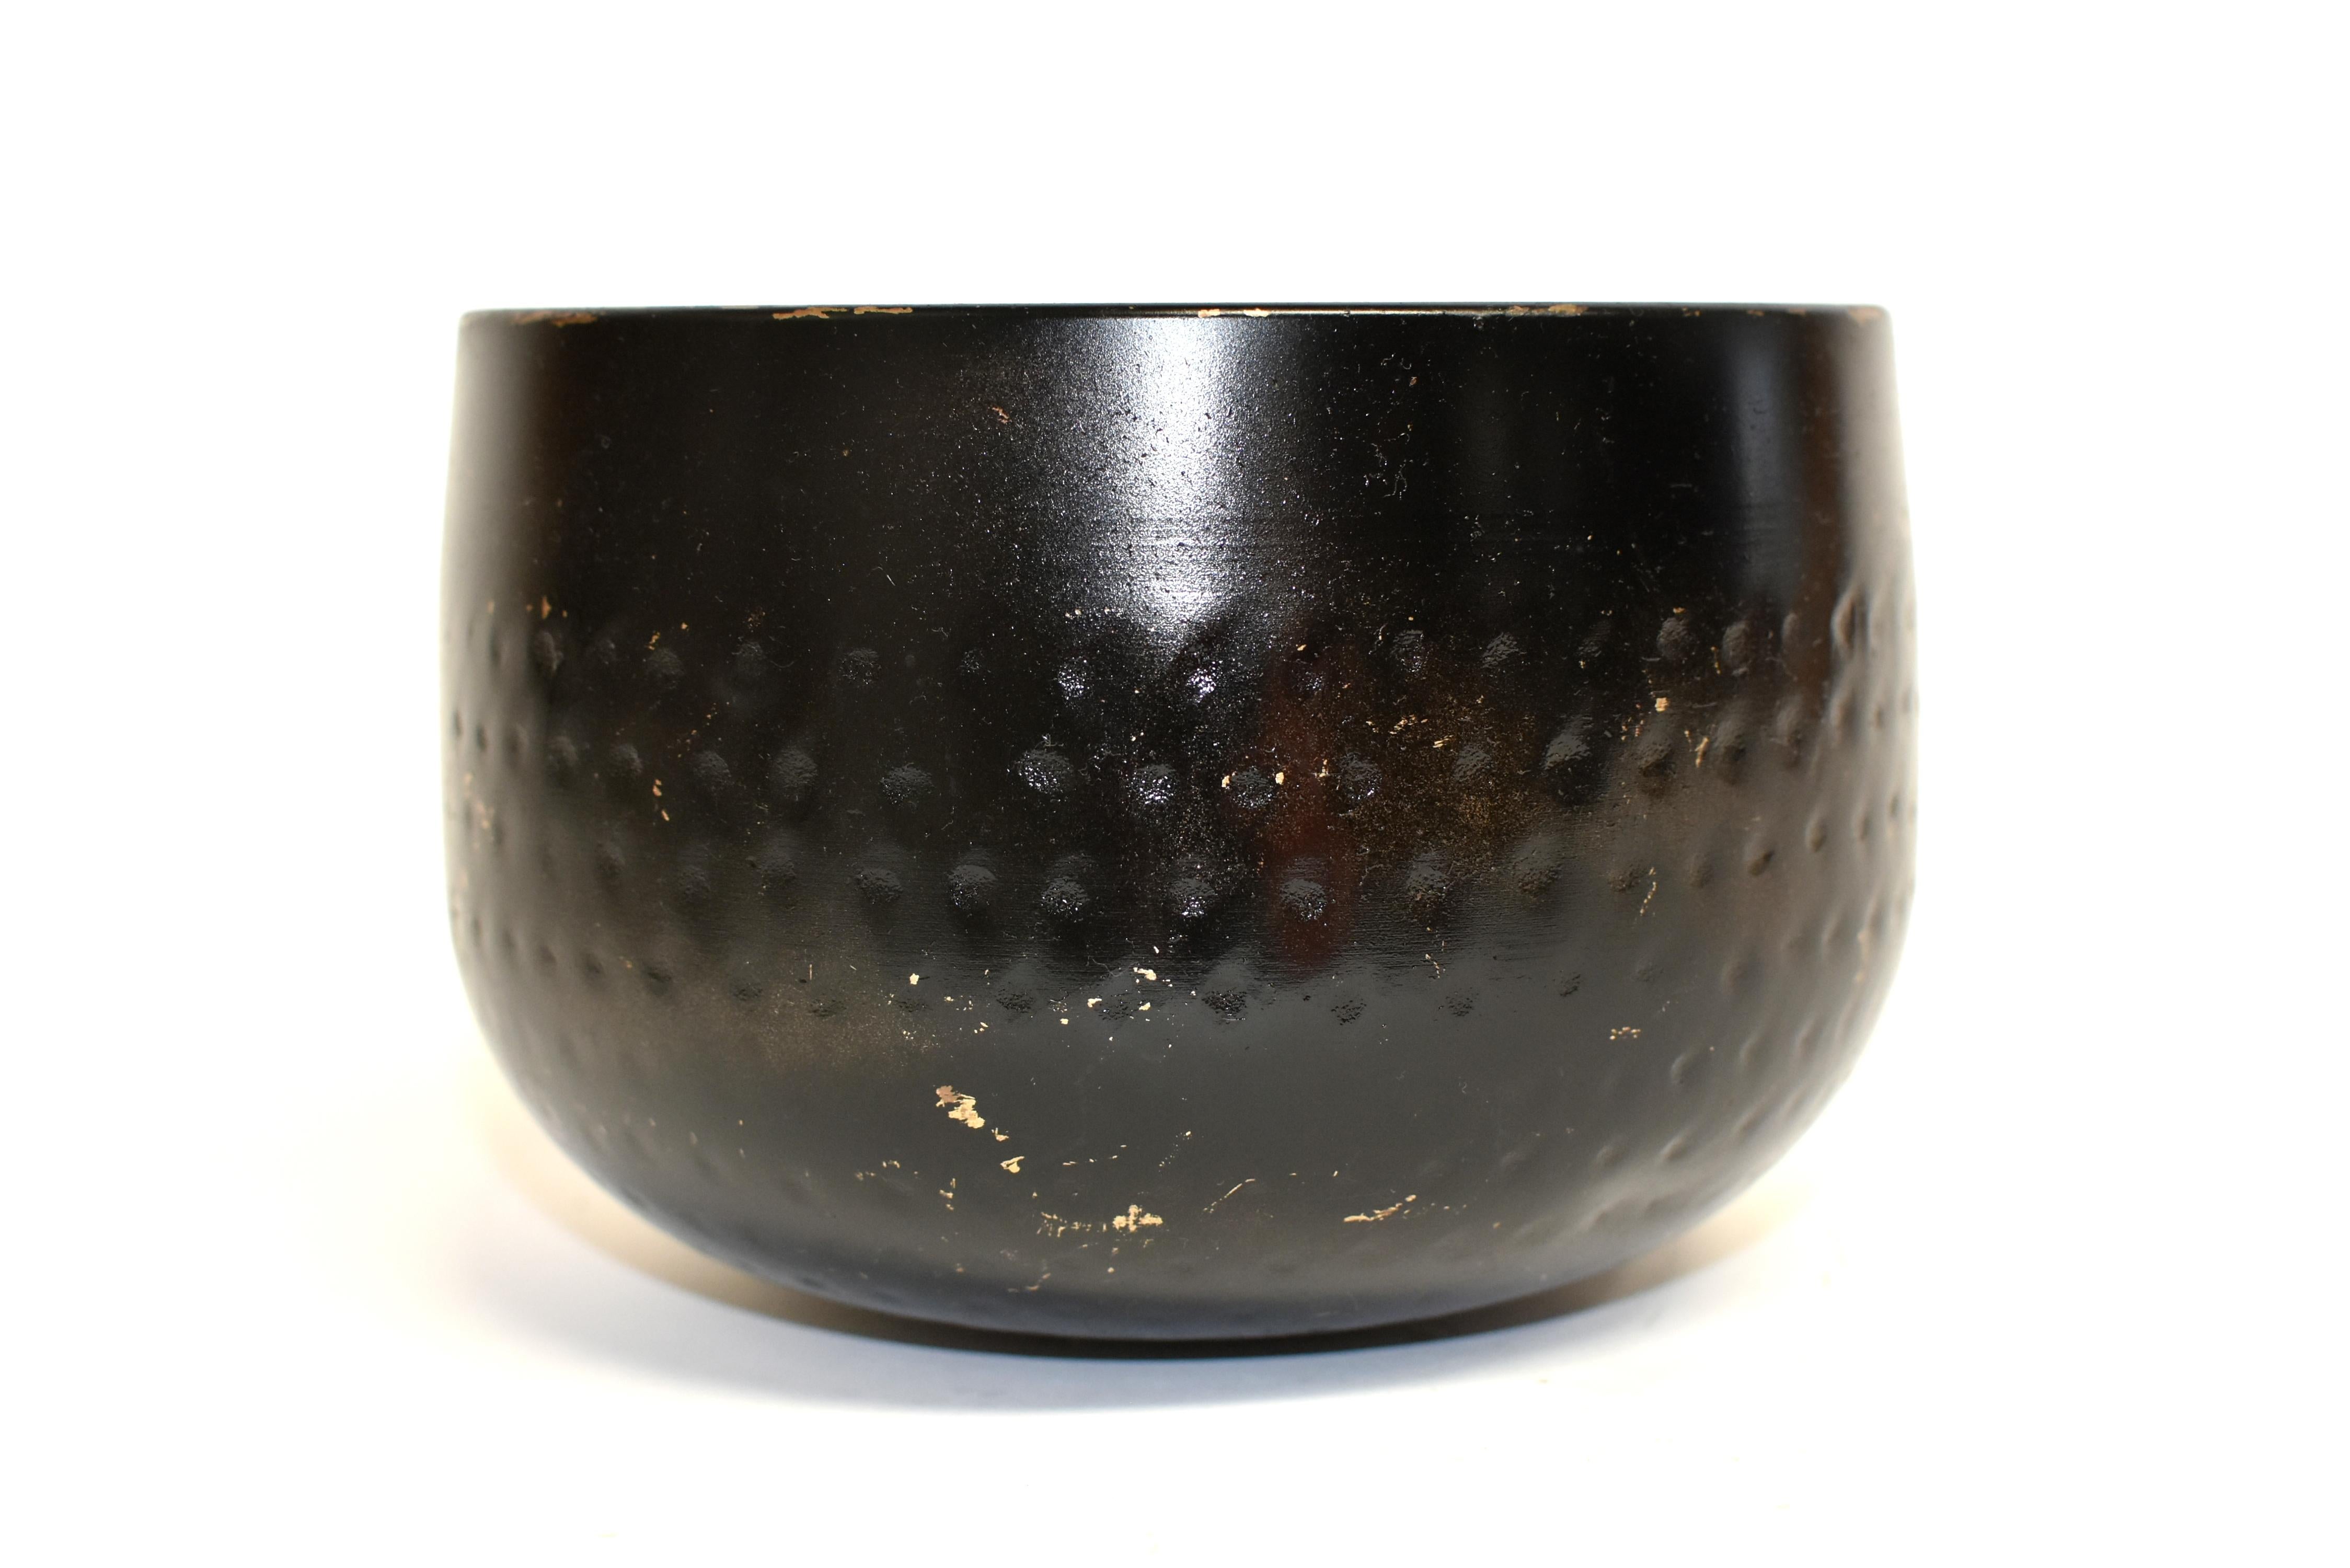 A beautiful singing bowl made of solid bronze with hand-hammered dot pattern. This bowl makes a beautiful, enlightening sound that is at once soothing and thought provoking. Such a bowl was used in the Japanese temple to sync energy between human